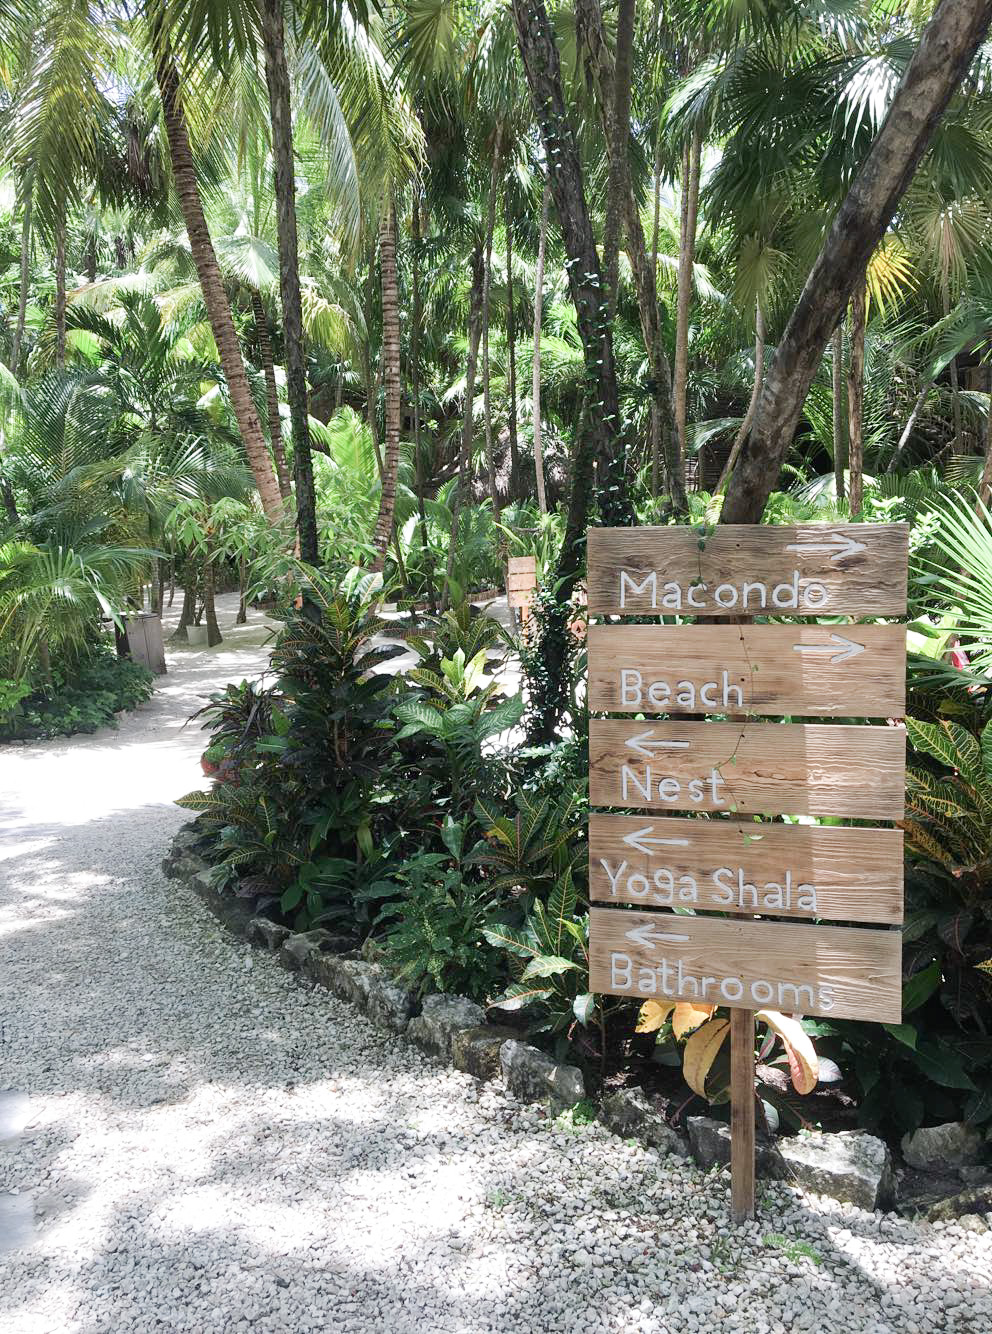 Entrance to Macondo in the Nomade Hotel in Tulum, Mexico